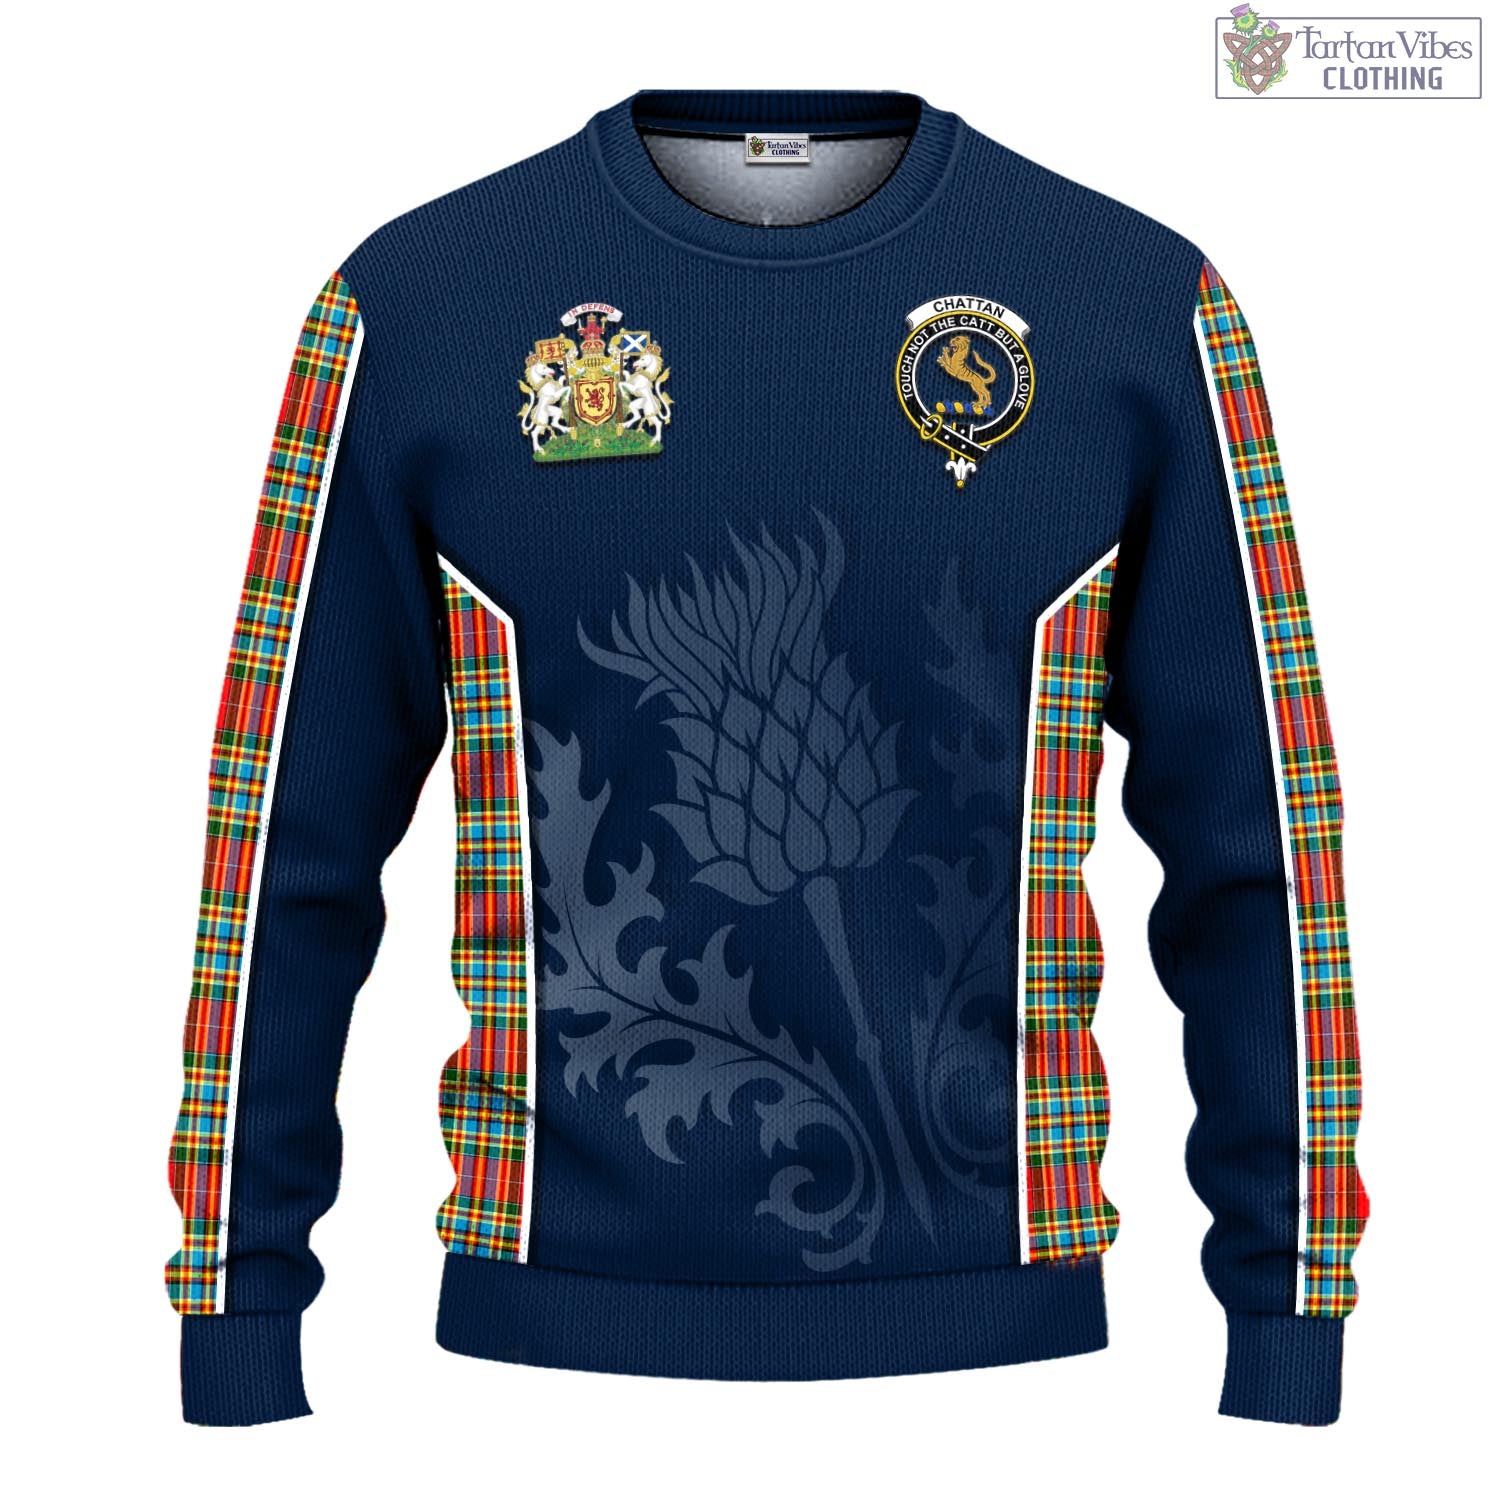 Tartan Vibes Clothing Chattan Tartan Knitted Sweatshirt with Family Crest and Scottish Thistle Vibes Sport Style